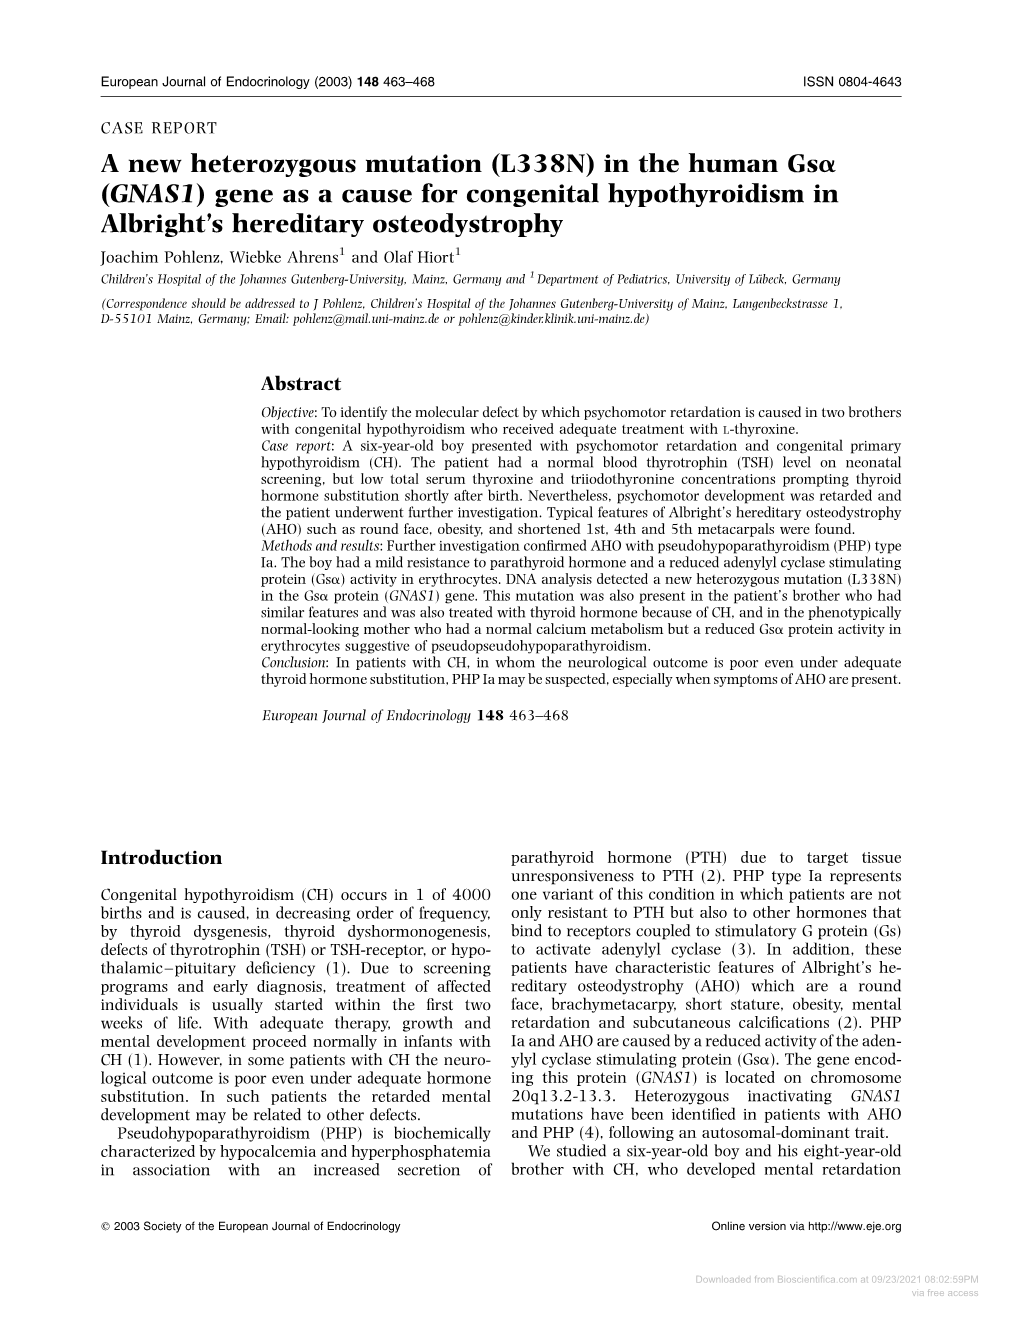 (GNAS1) Gene As a Cause for Congenital Hypothyroidism In